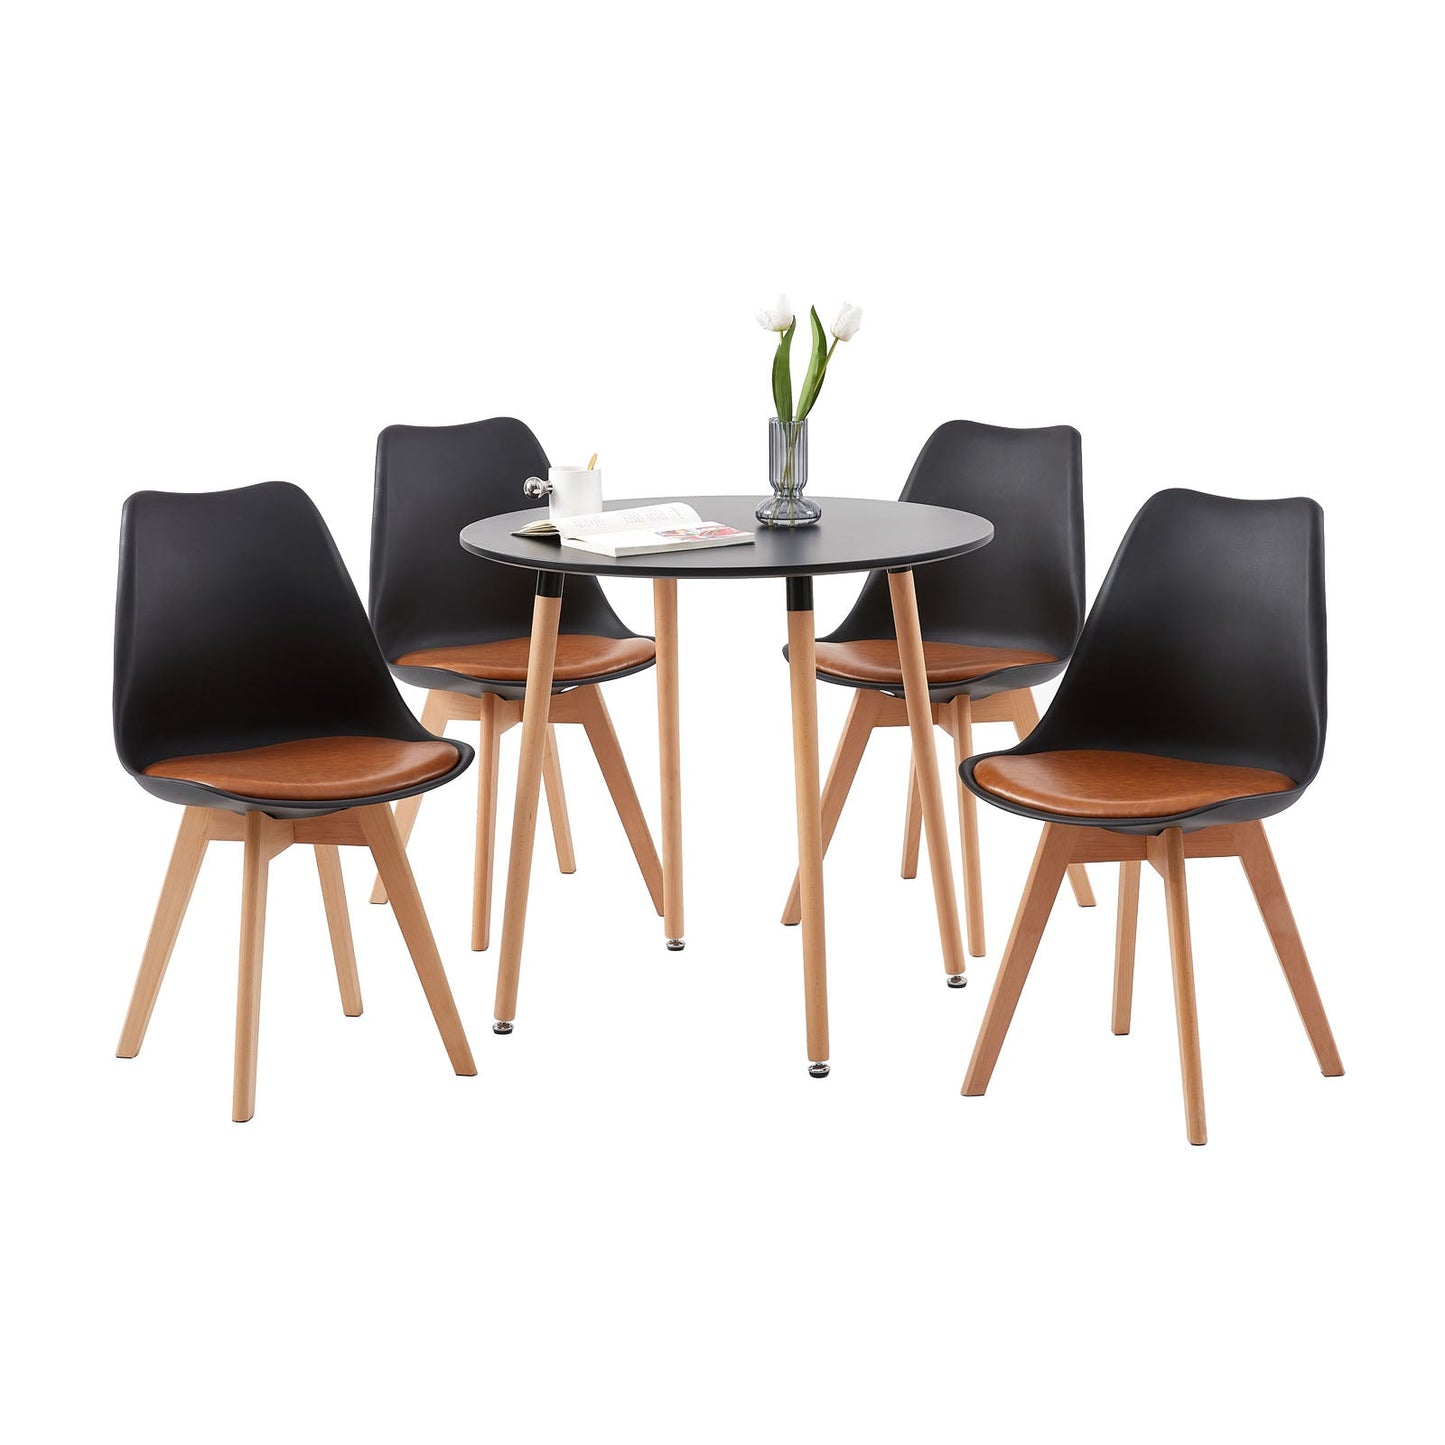 TULIP PP Dining Chairs Retro Design Upholstered Chair with Beech Legs  - Brown